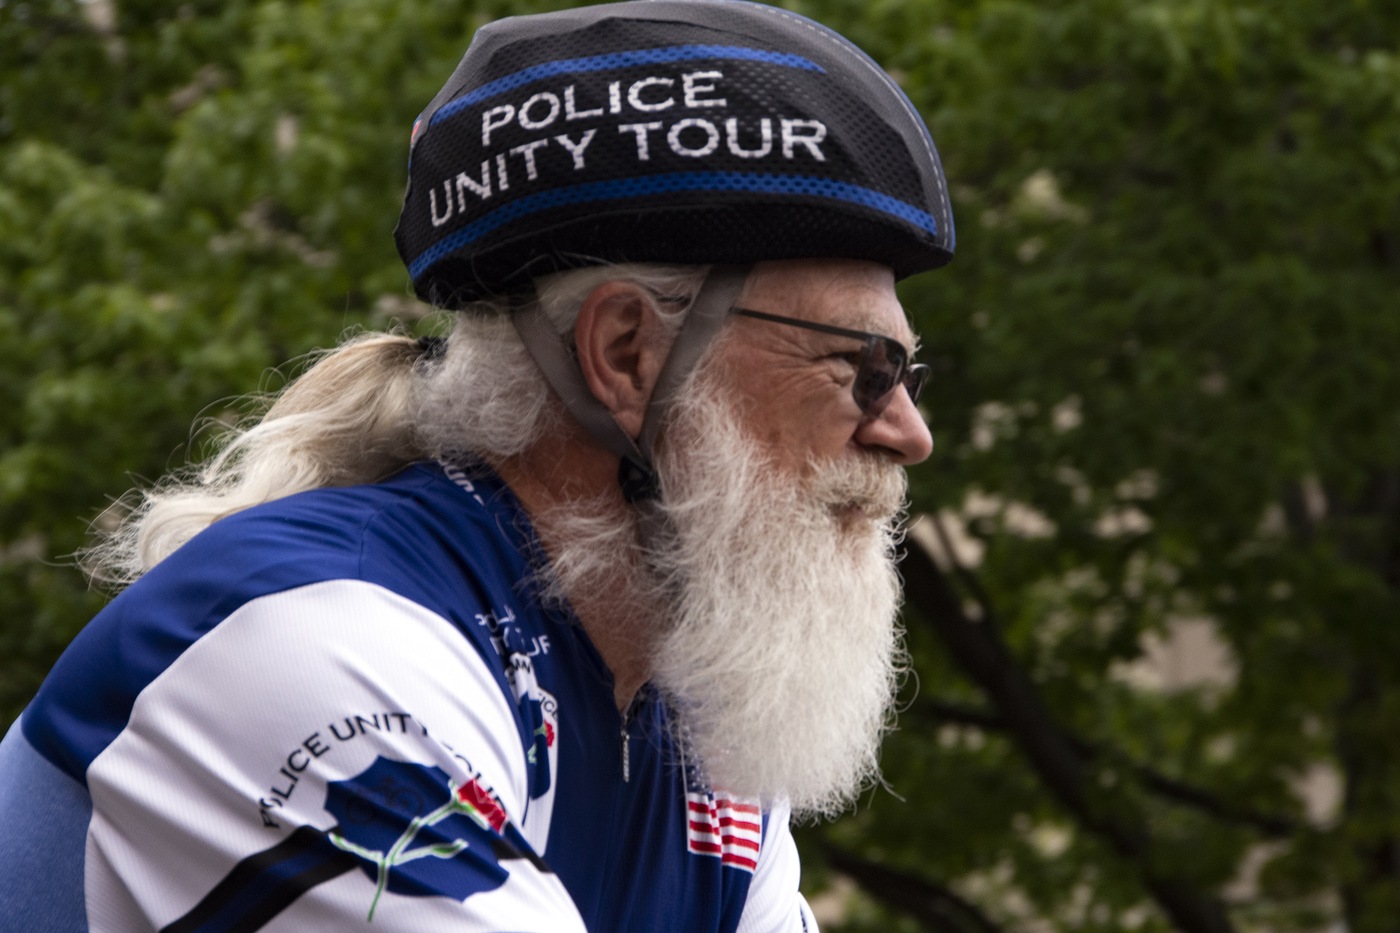 The 2022 Police Unity Tour - Bike Rider Male